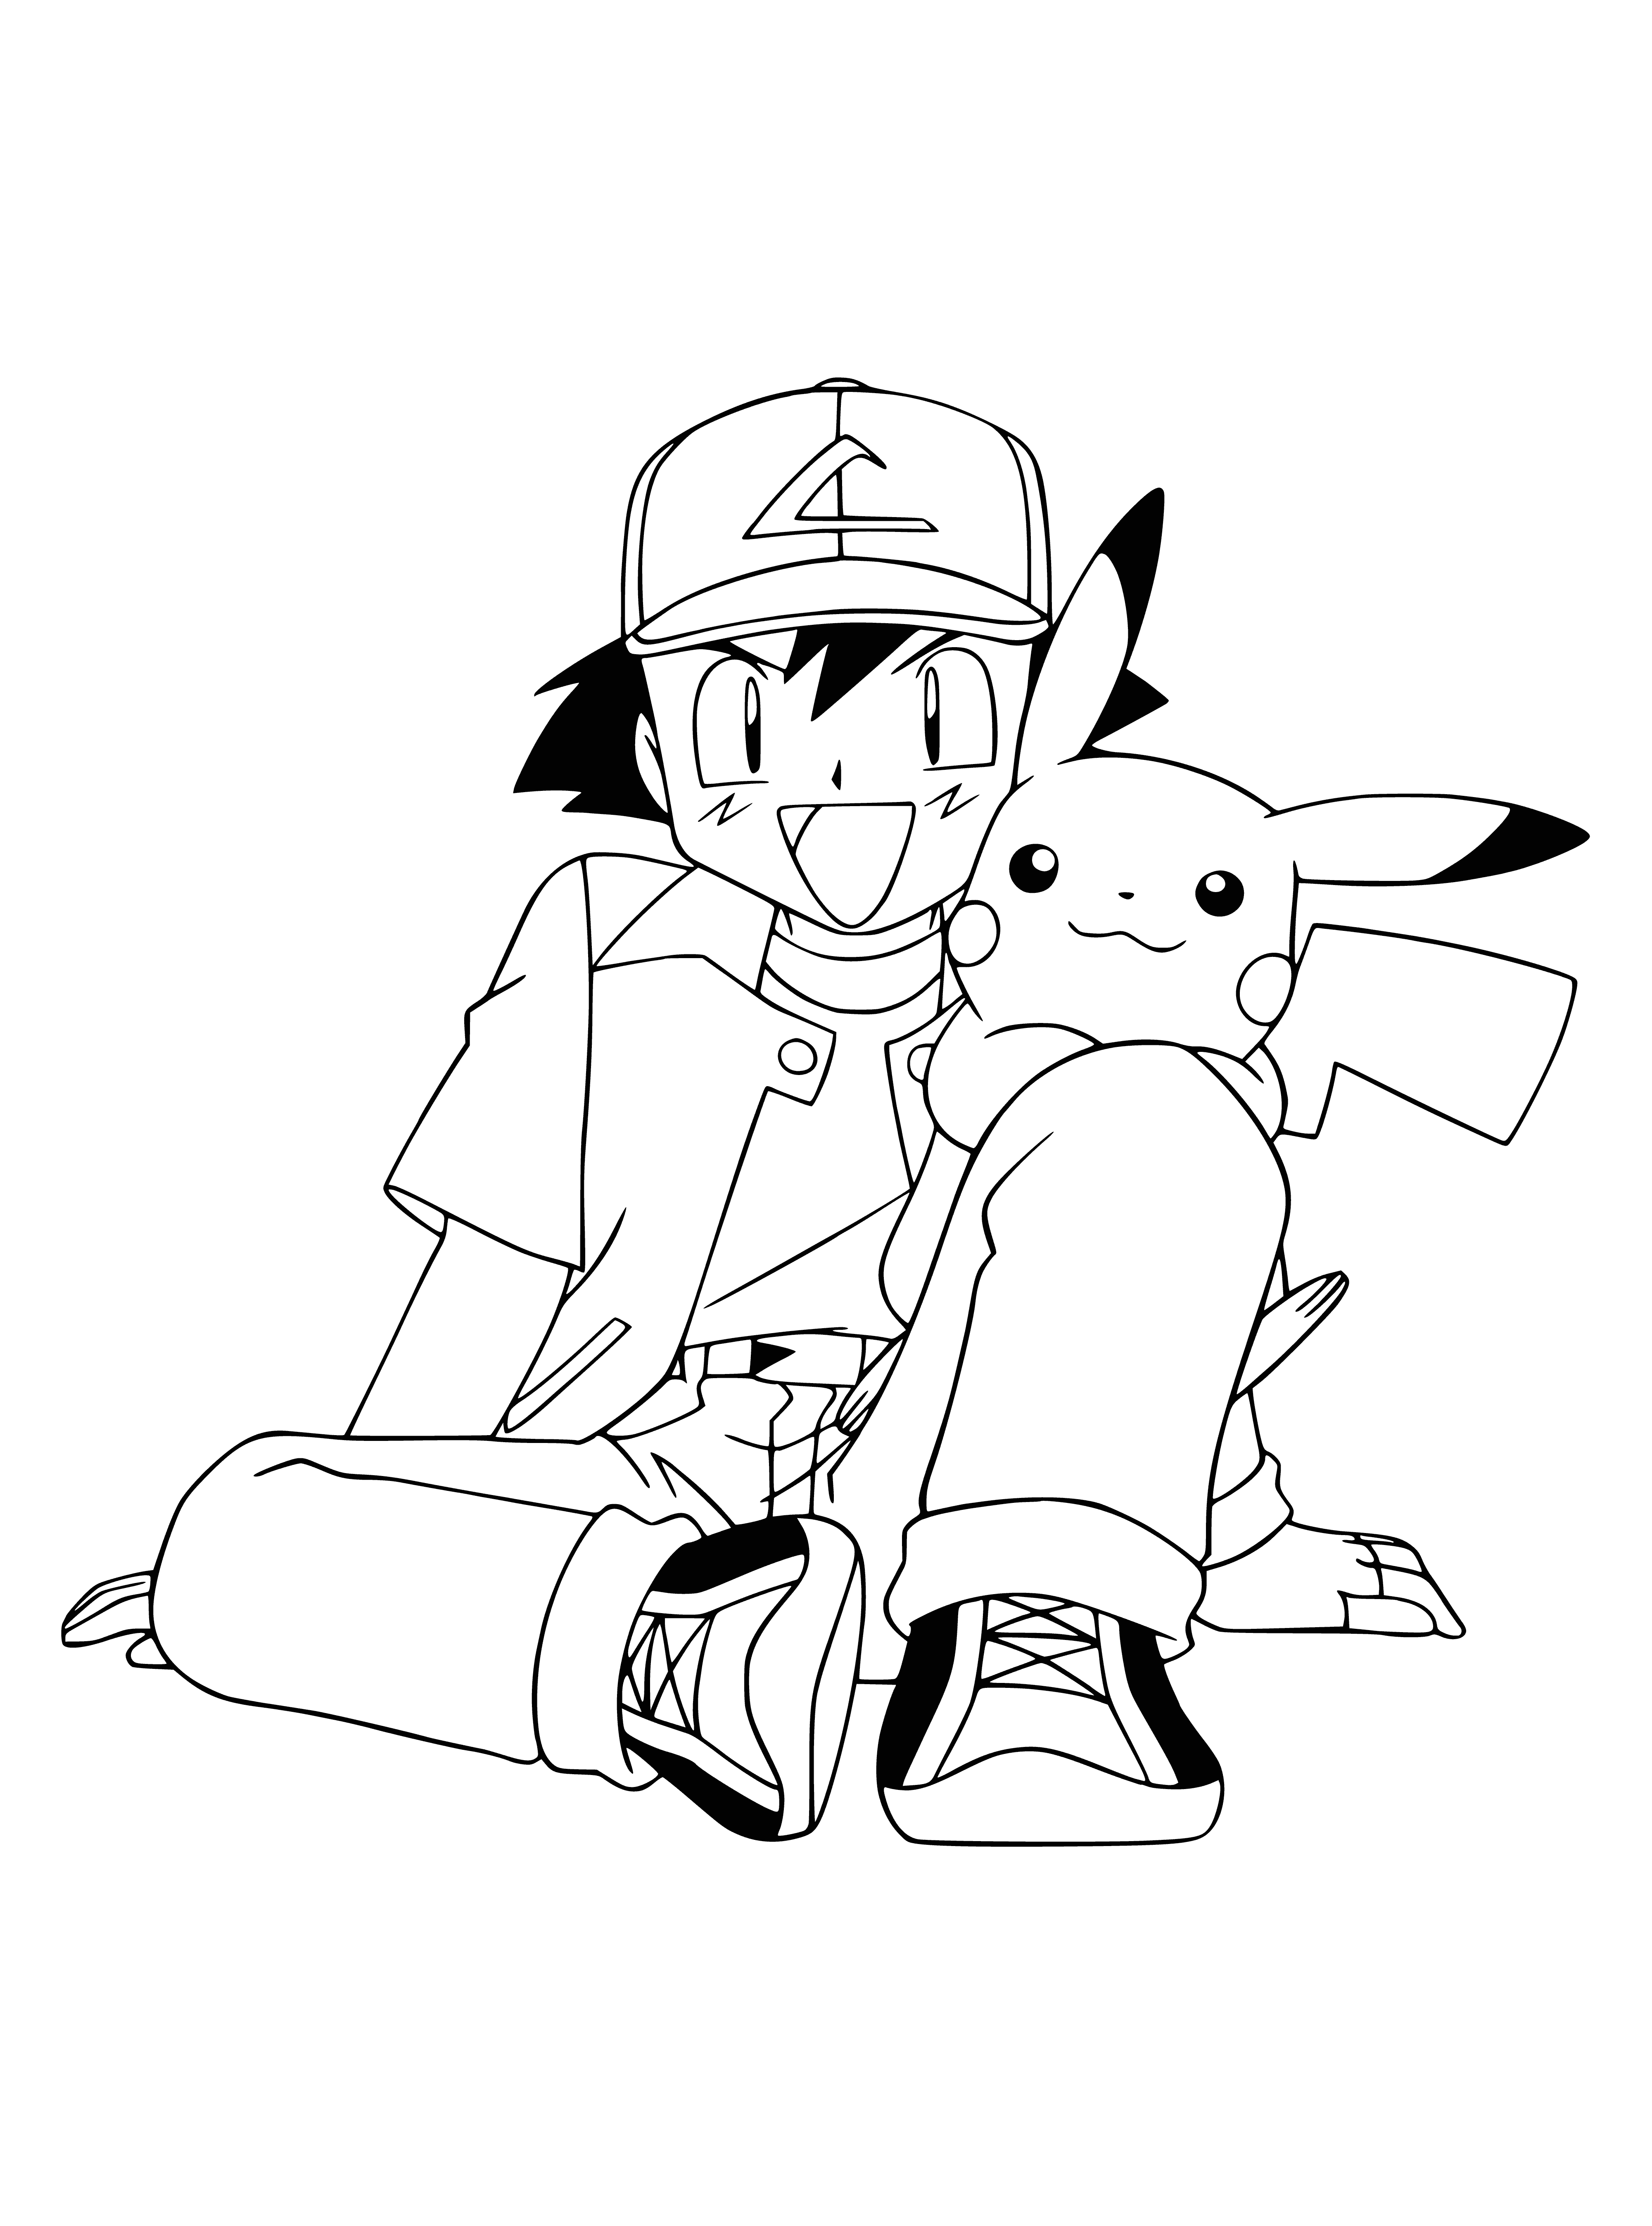 coloring page: Ash & Pikachu, a human boy with black hair & a yellow electric mouse. He wears blue & Pikachu sits on his head. #friendshipgoals